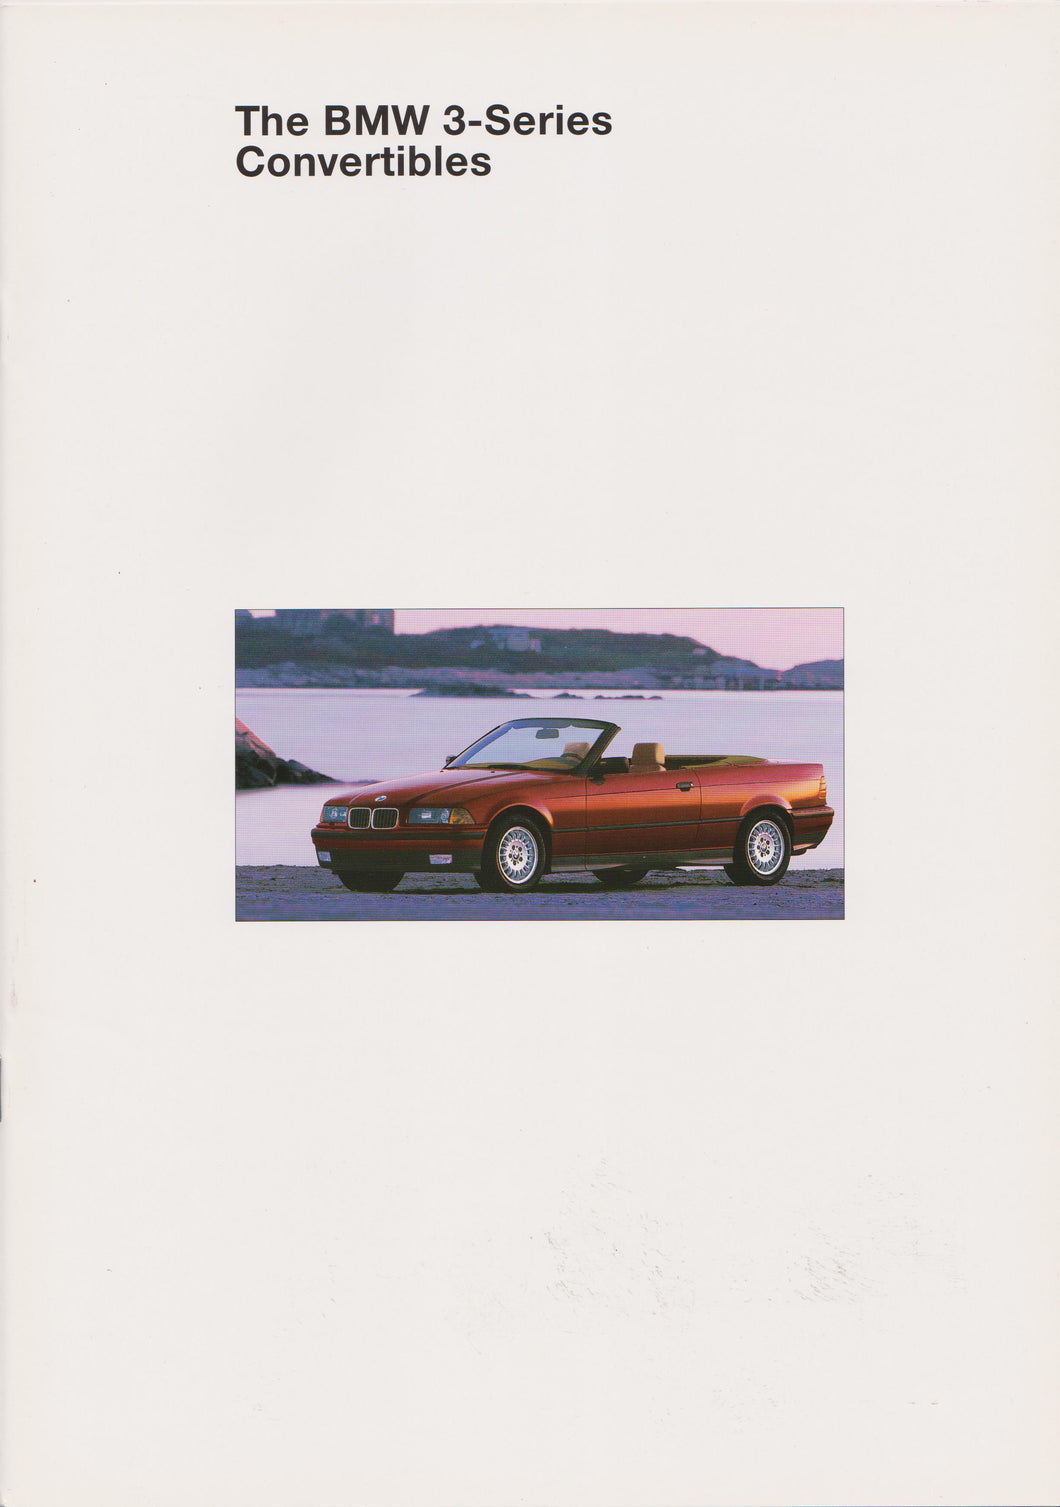 Brochure - The BMW 3-Series Convertibles (1994)